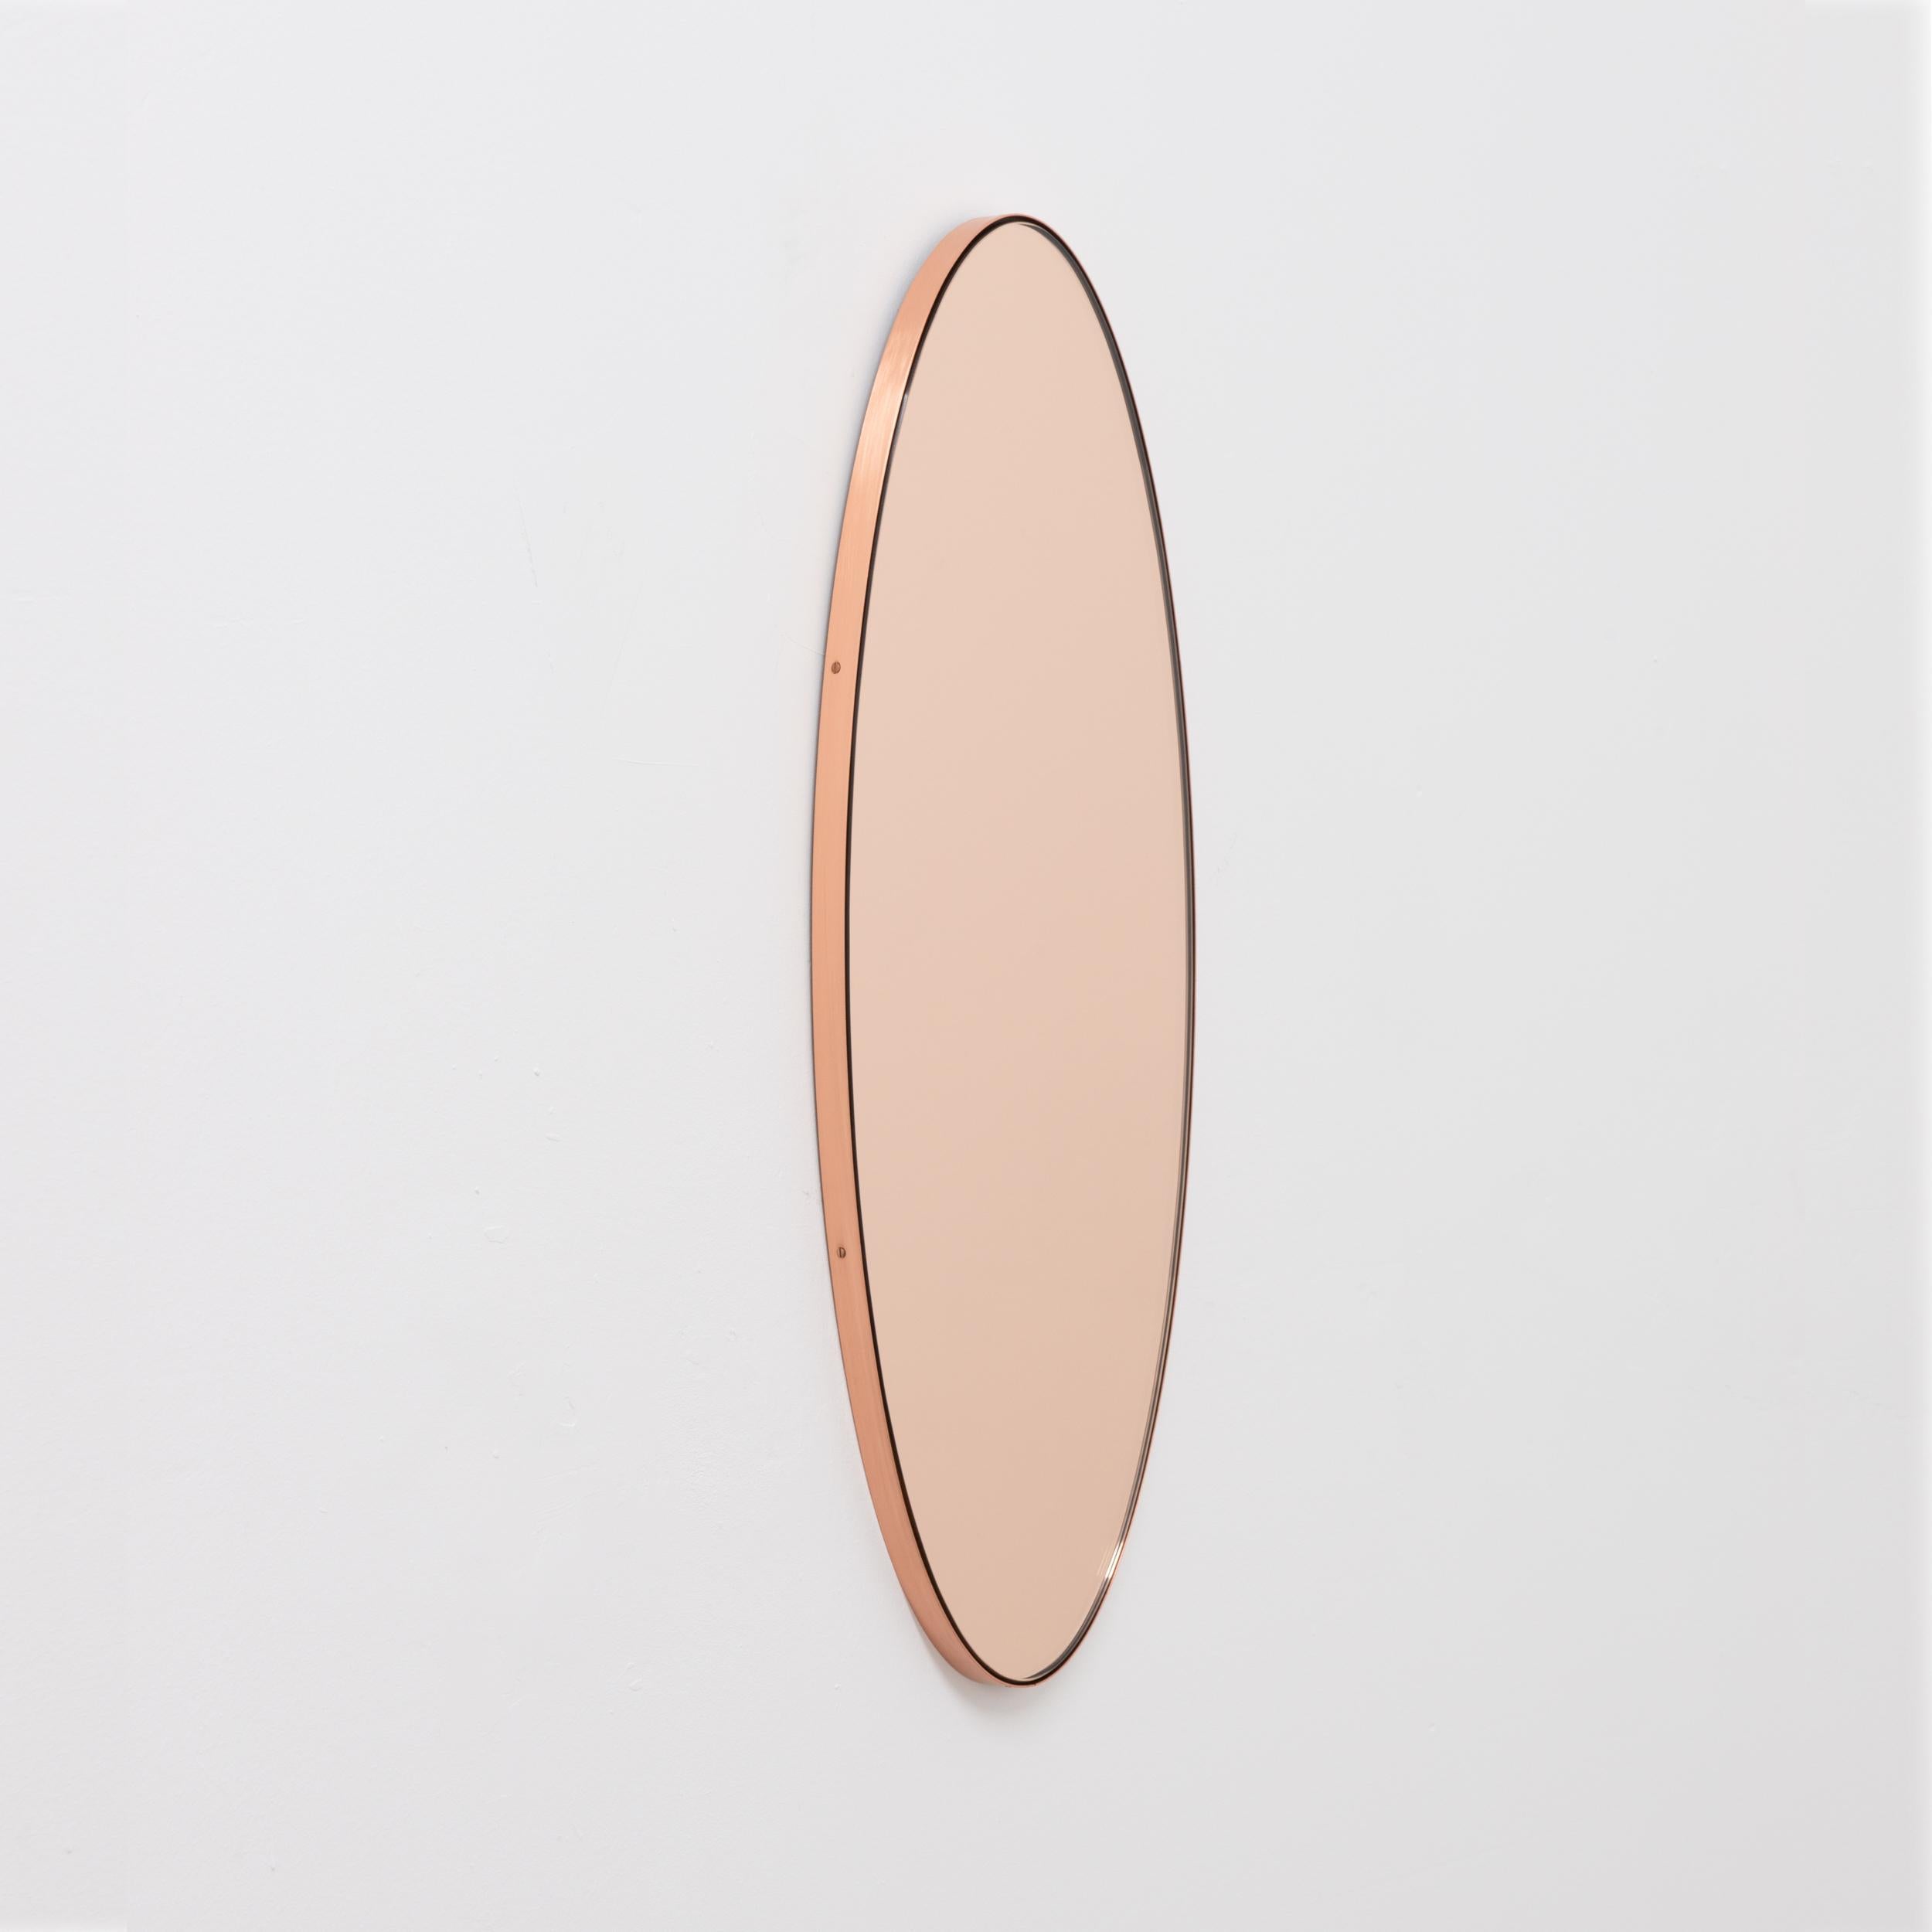 Contemporary Ovalis™ oval shaped rose gold/peach mirror with an elegant solid brushed copper frame. Designed and handcrafted in London, UK.

Our mirrors are designed with an integrated French cleat (split batten) system that ensures the mirror is